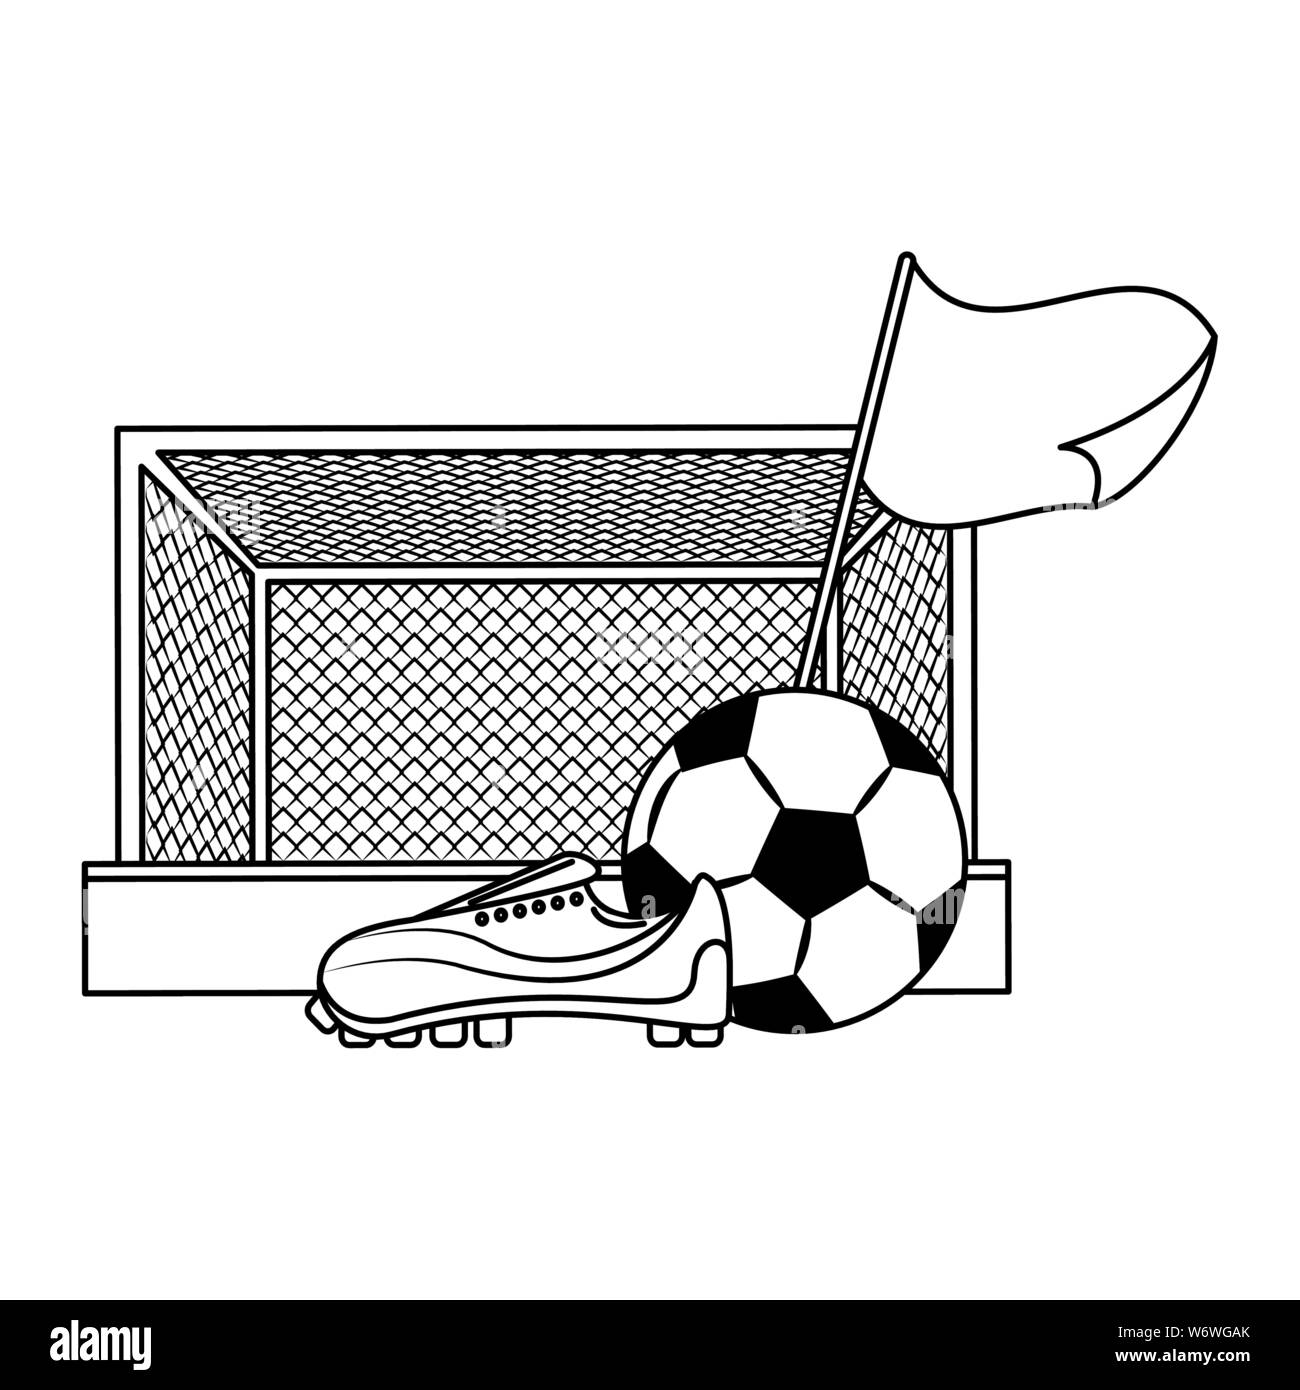 Soccer Football Sport Game Cartoon In Black And White Stock Vector Image Art Alamy